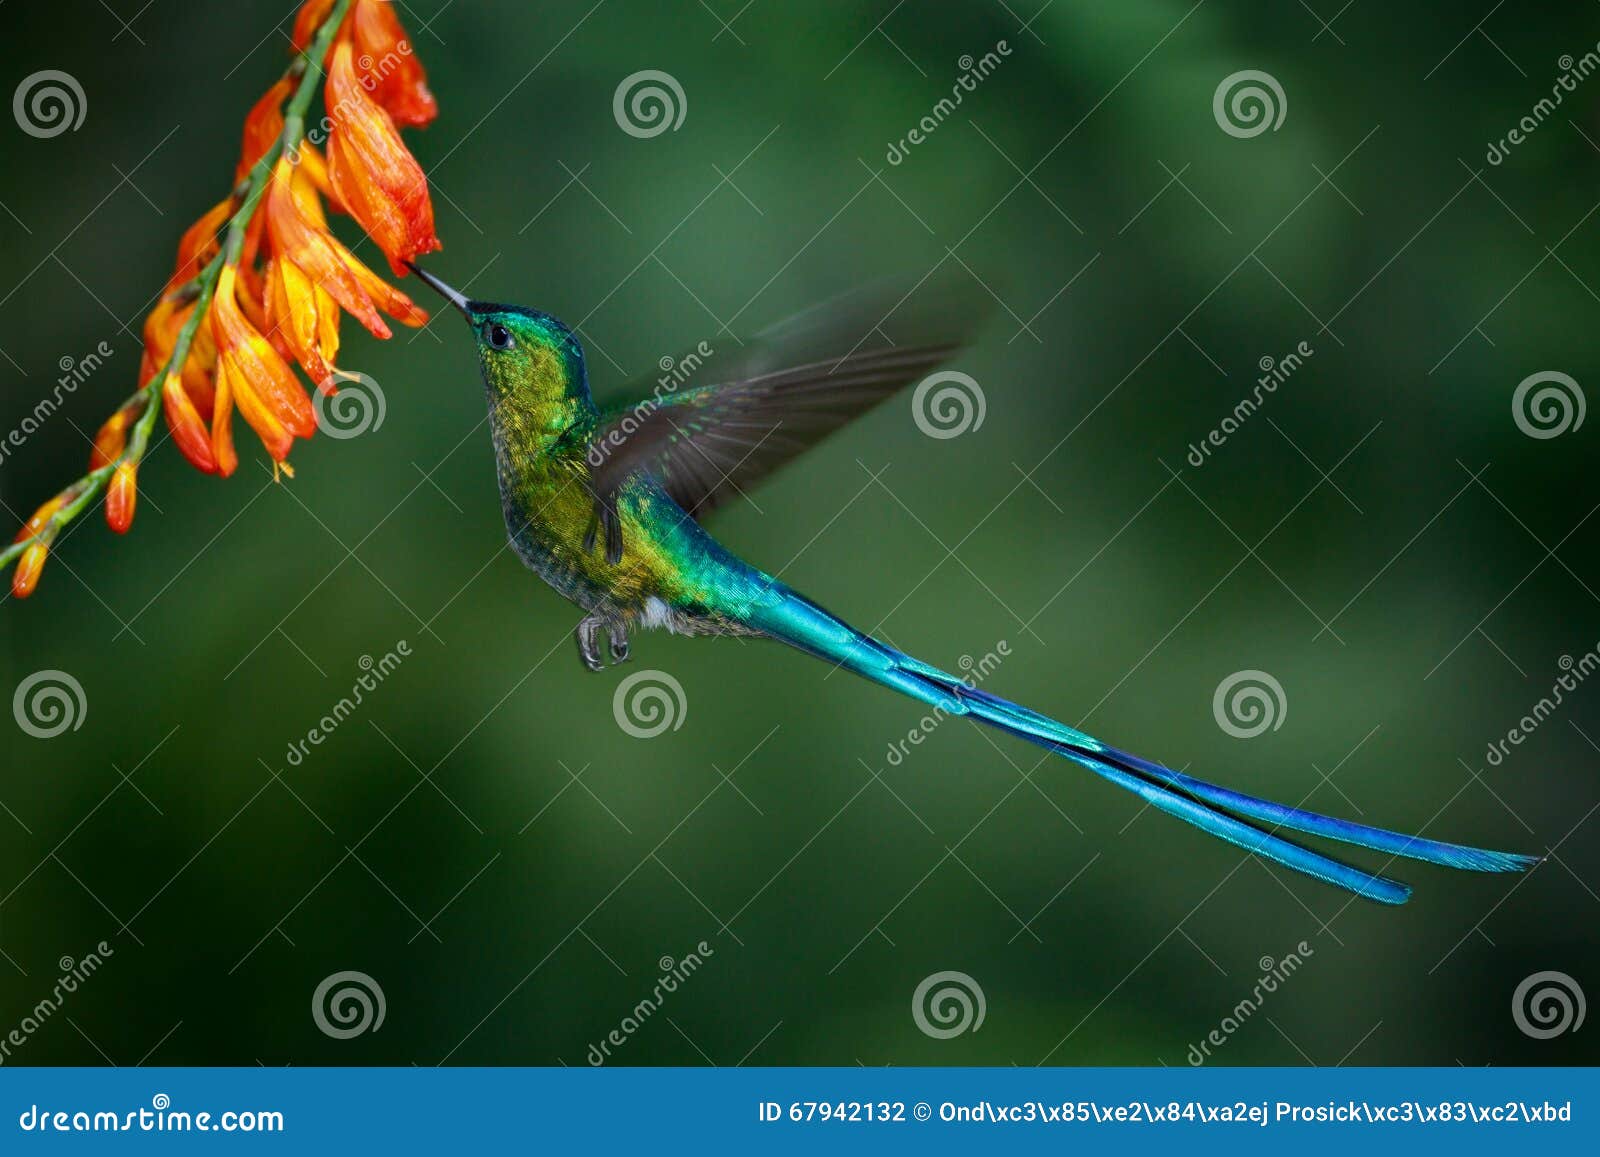 hummingbird long-tailed sylph with long blue tail feeding nectar from orange flower